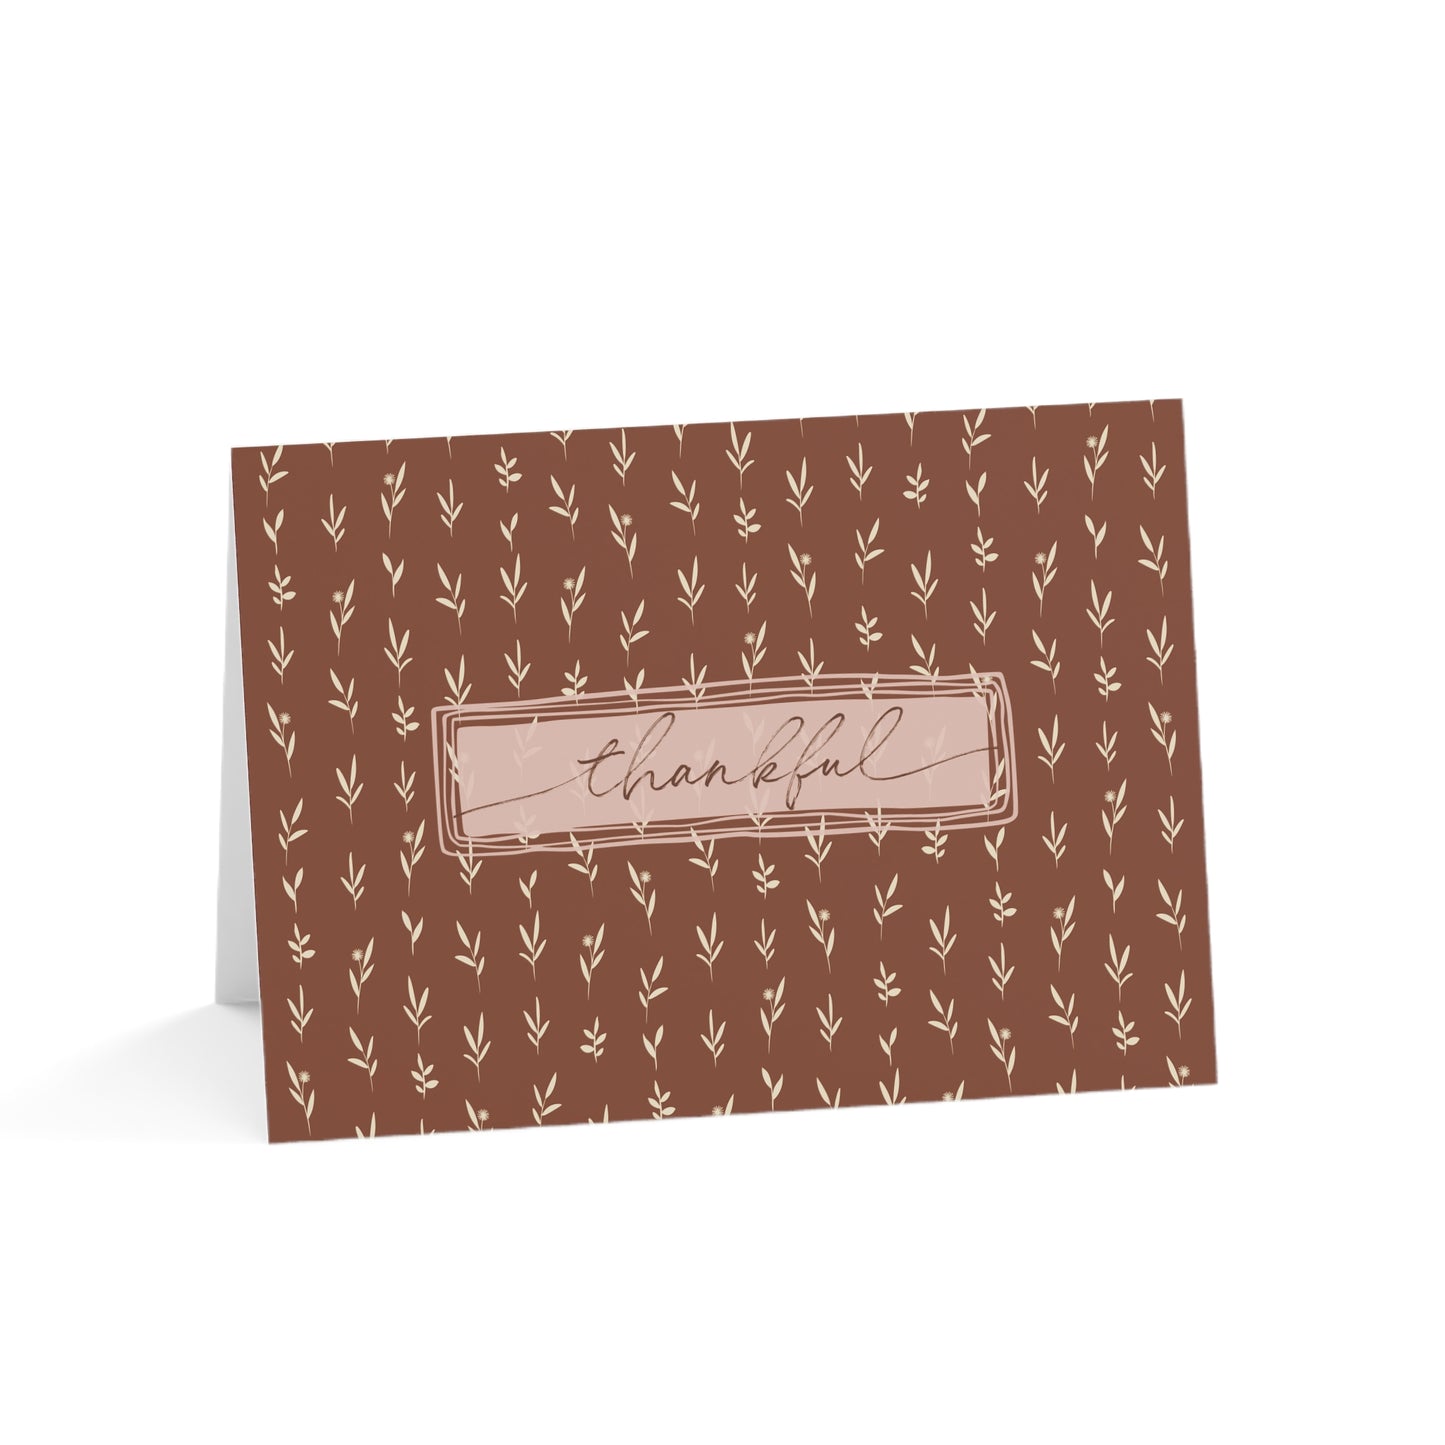 Thankful Harvest Greeting Cards (1, 10, 30, and 50pcs)